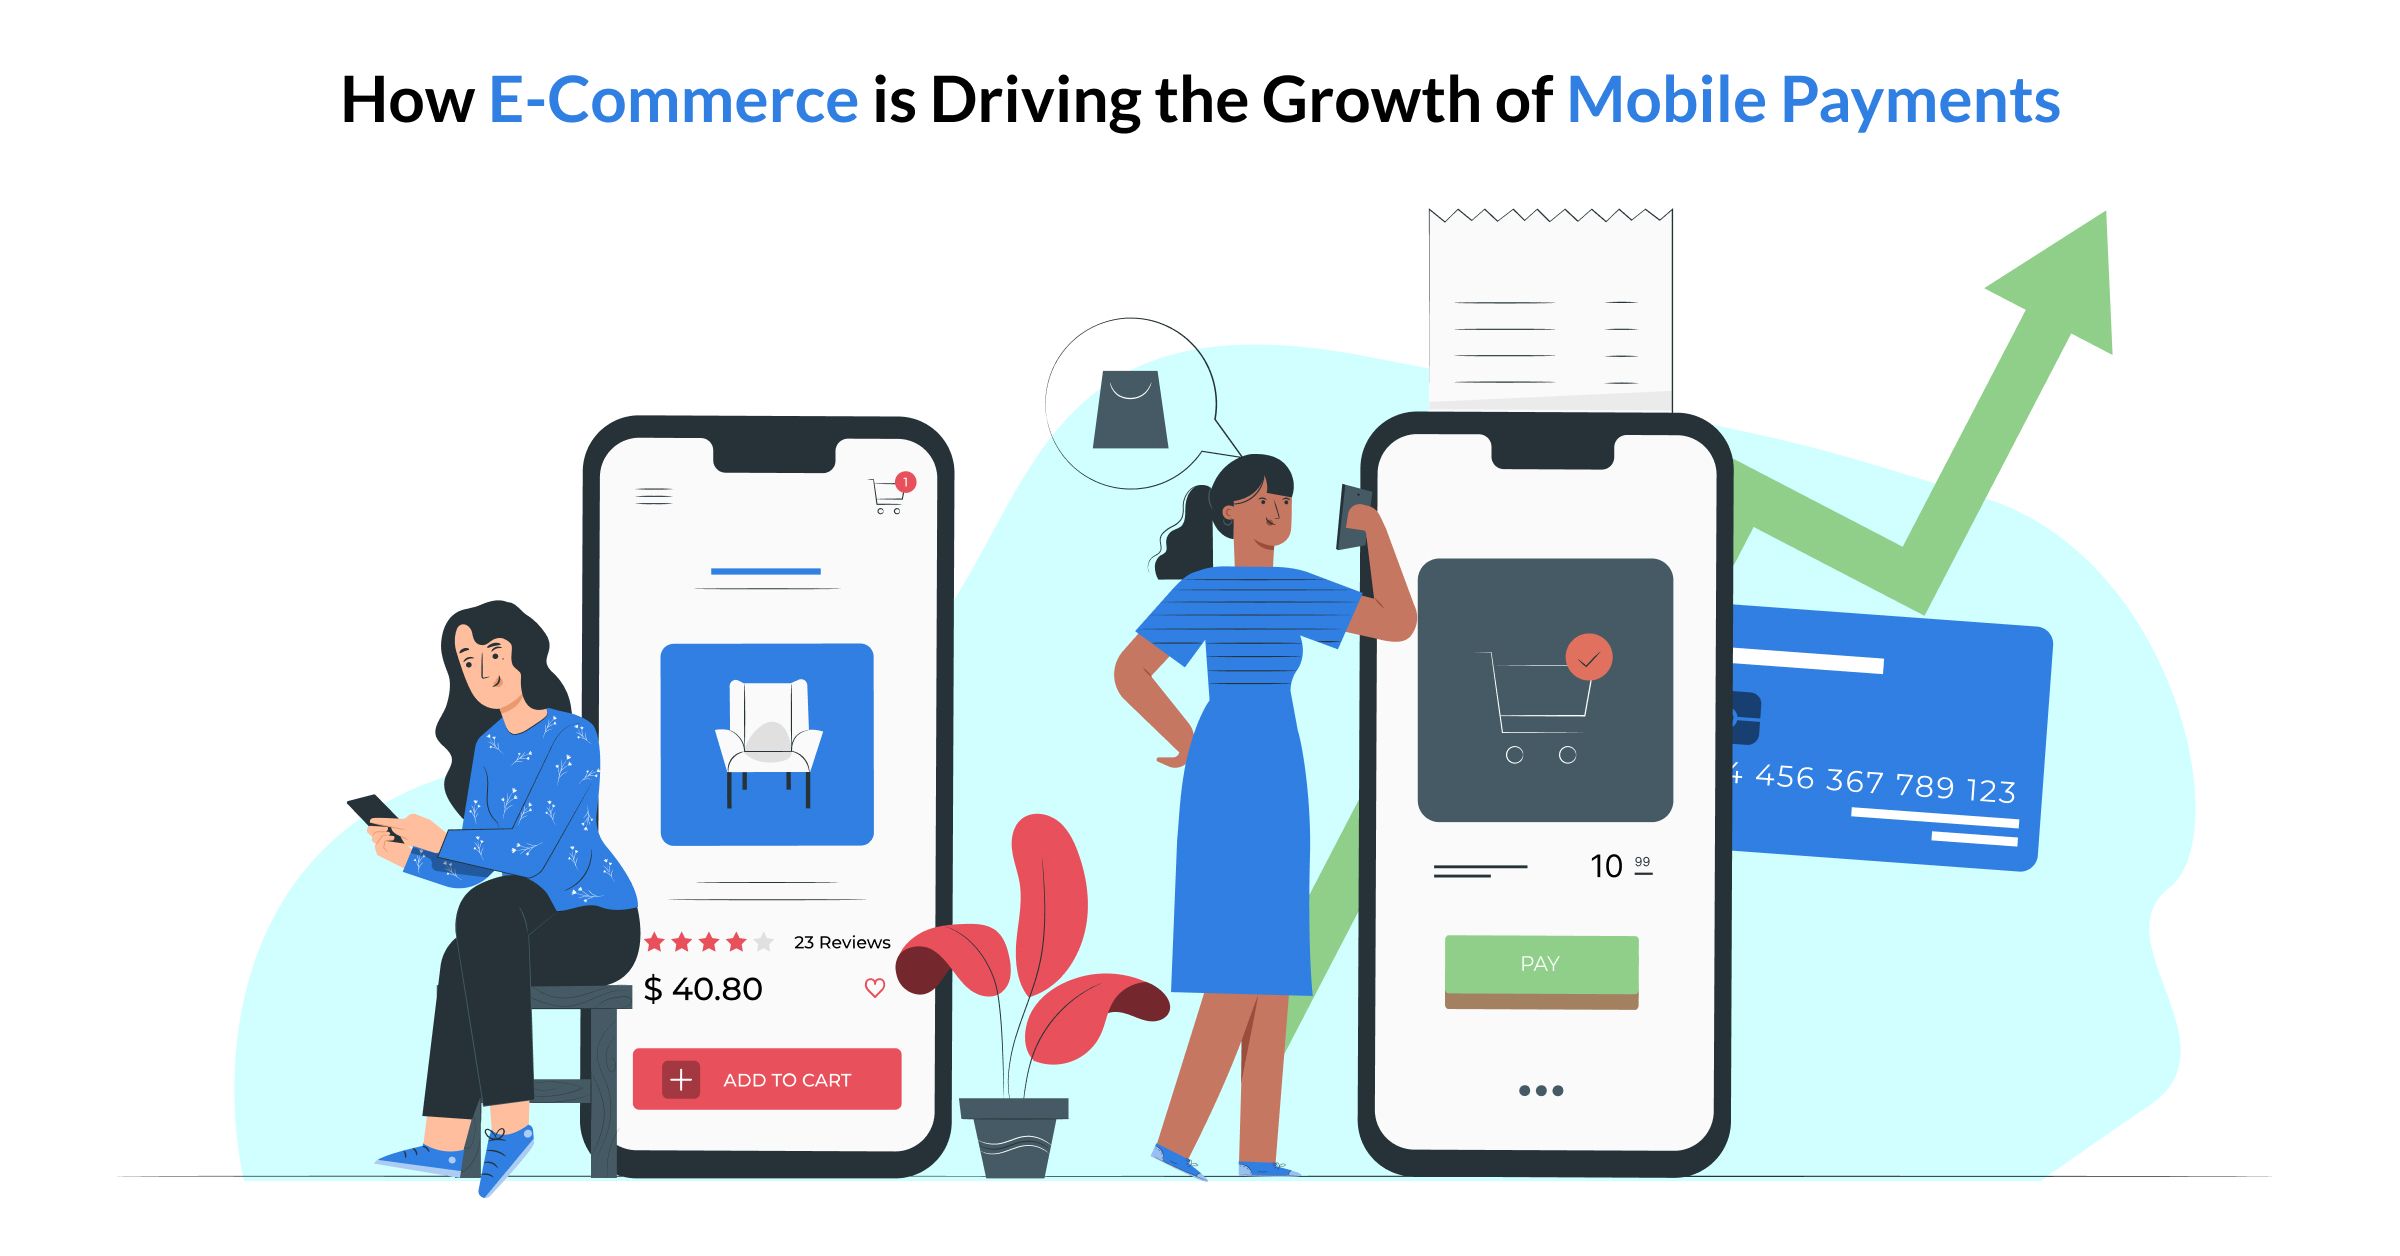 How E-Commerce is Driving the Growth of Mobile Payments